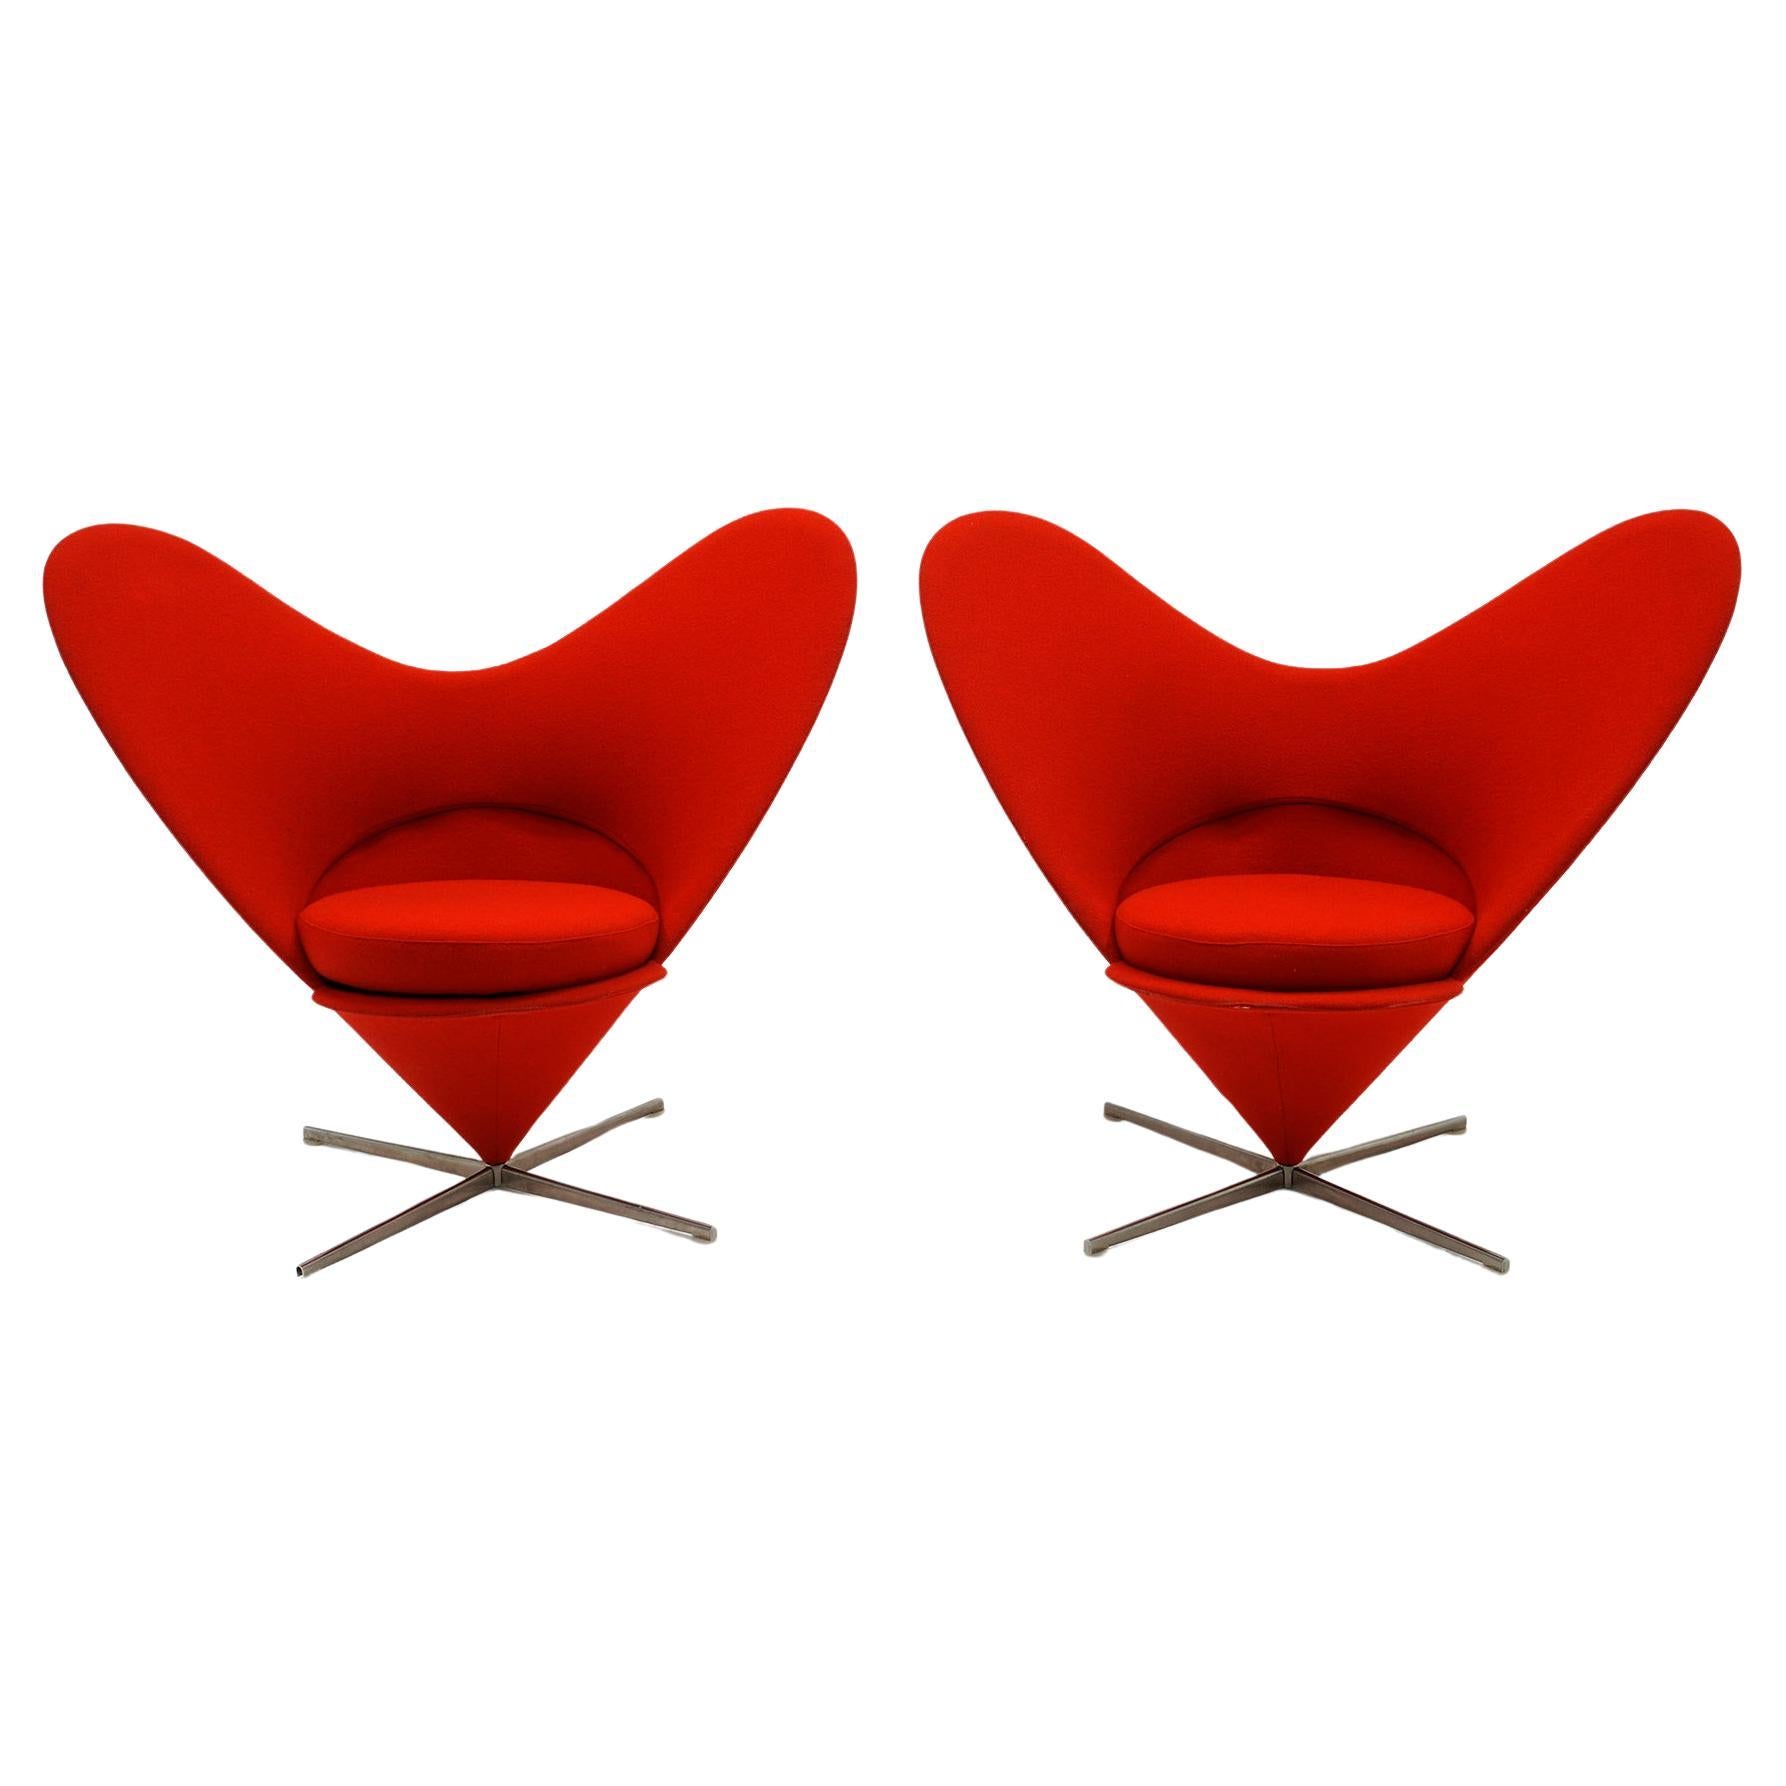 Pair of Red Heart Chairs by Verner Panton for Vitra, Great Condition.